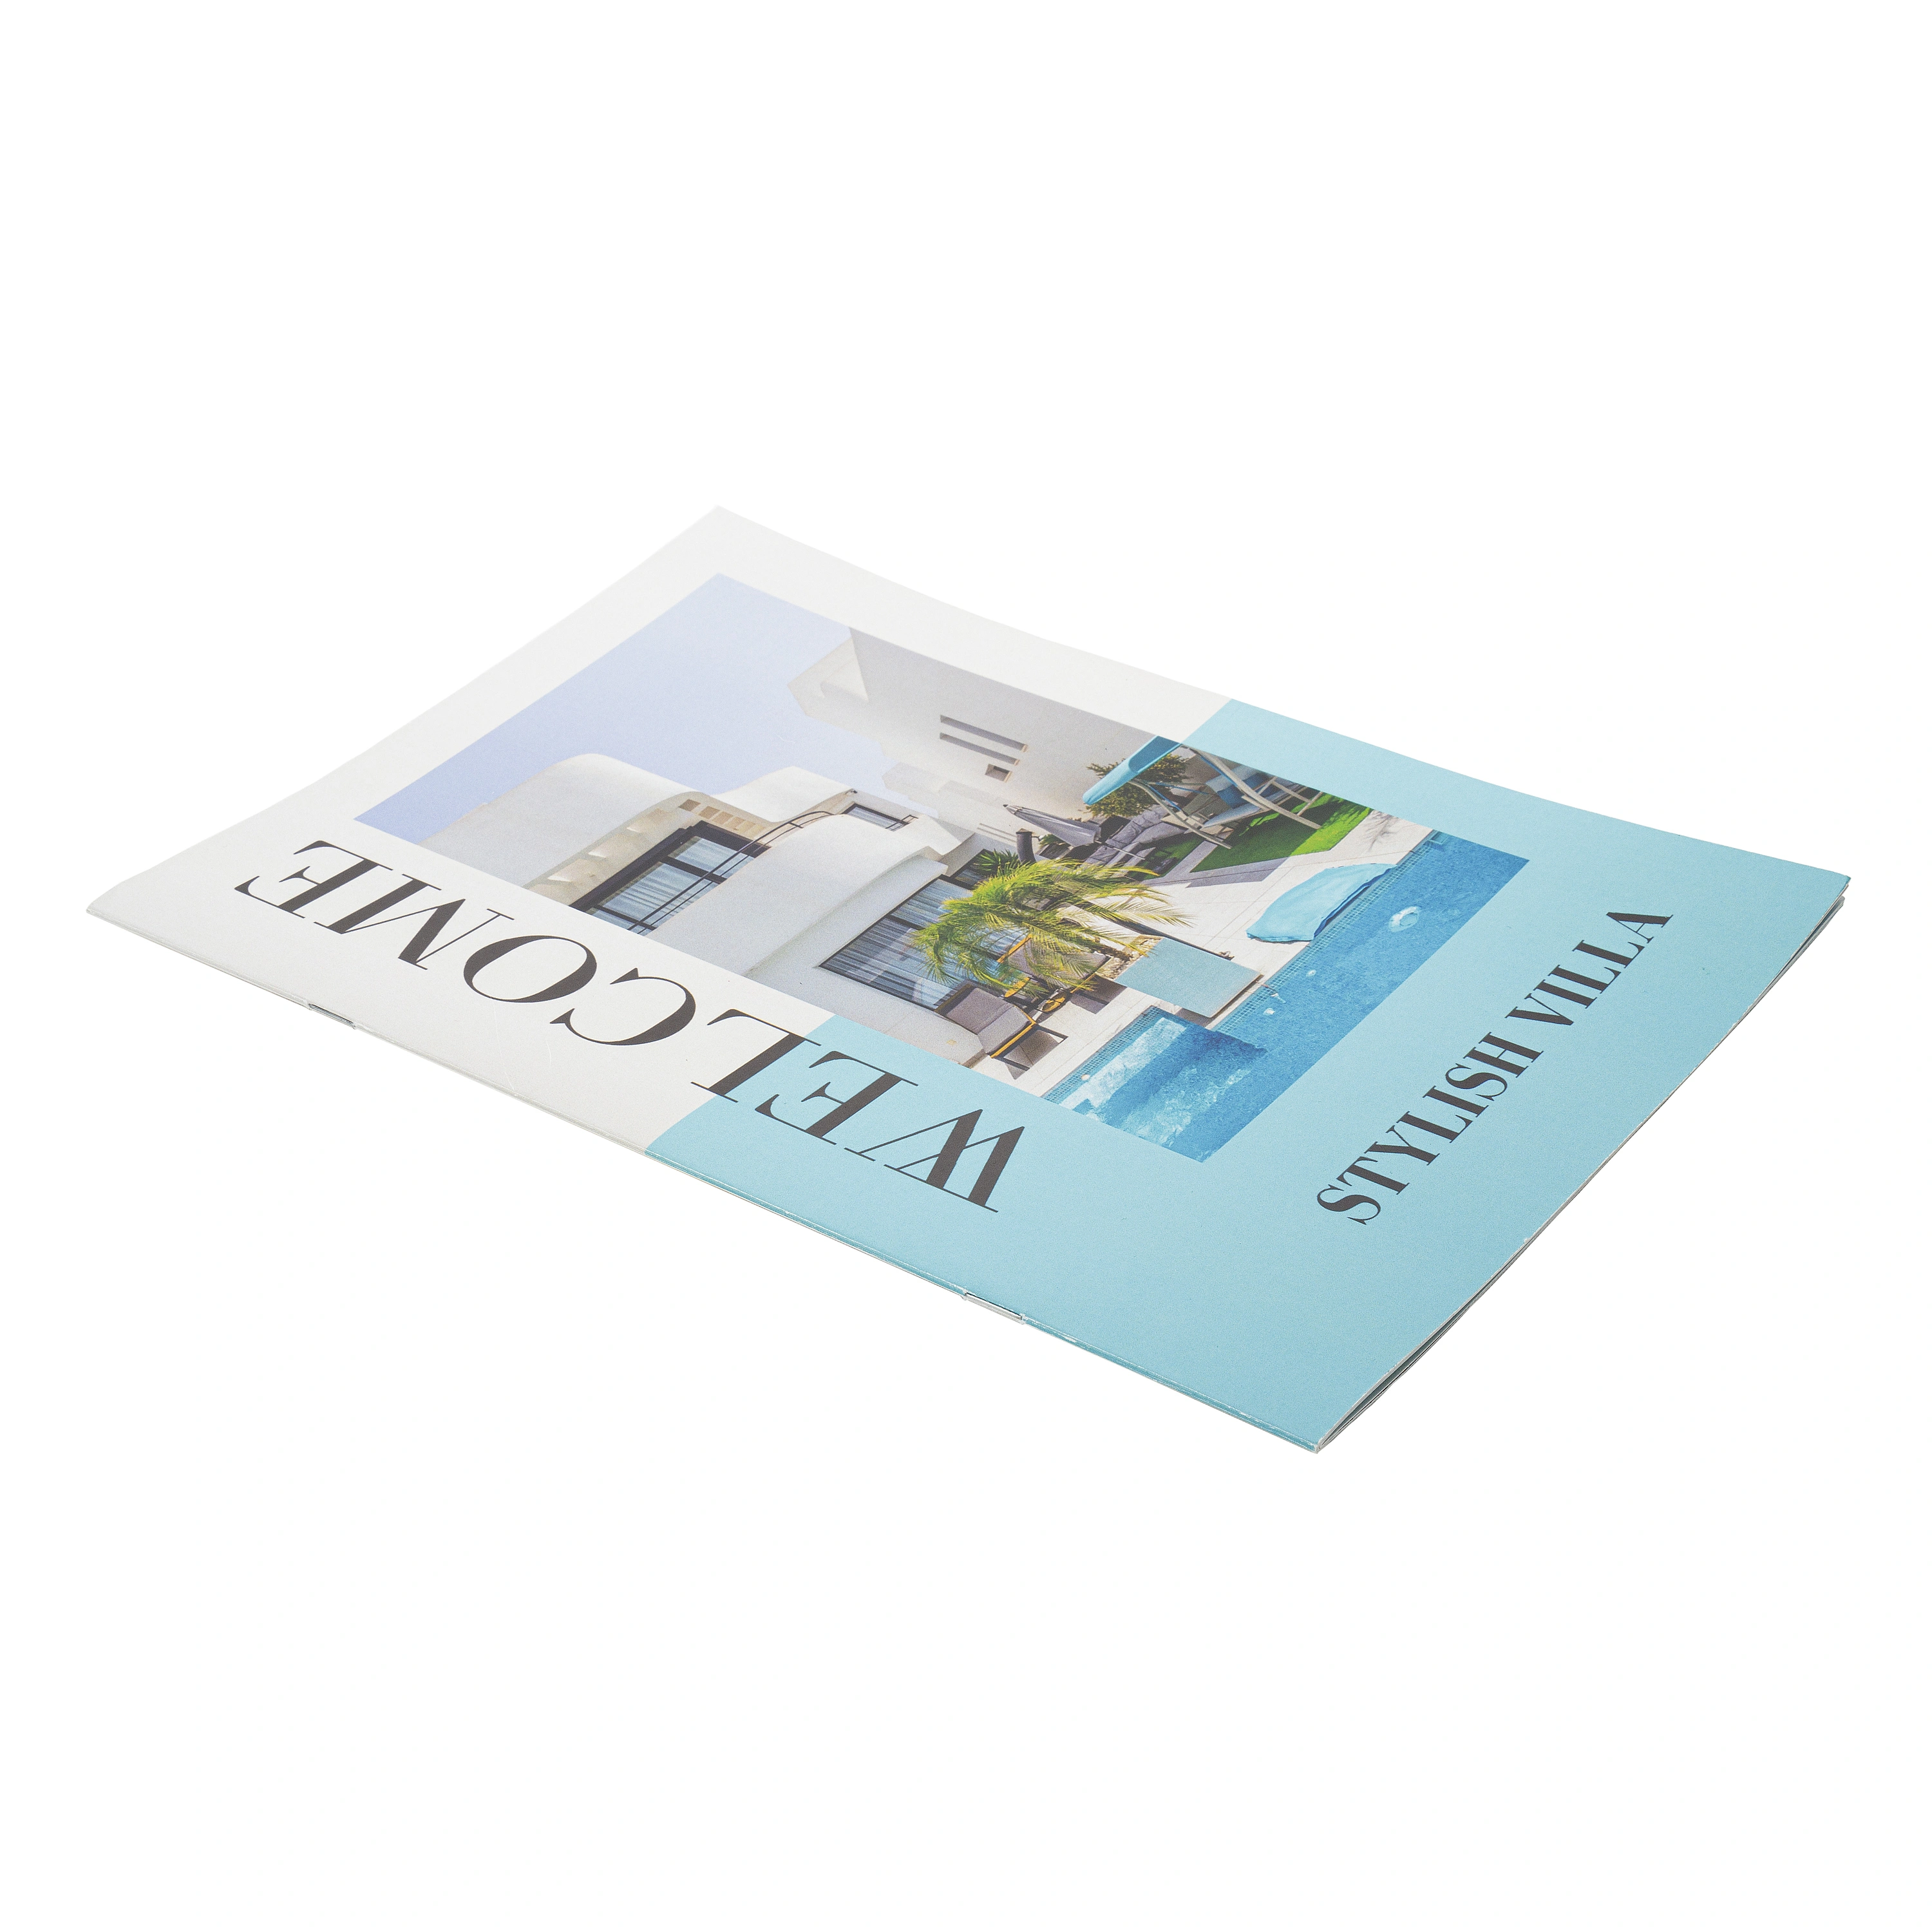 Booklets, brochures, catalogs - Printto: